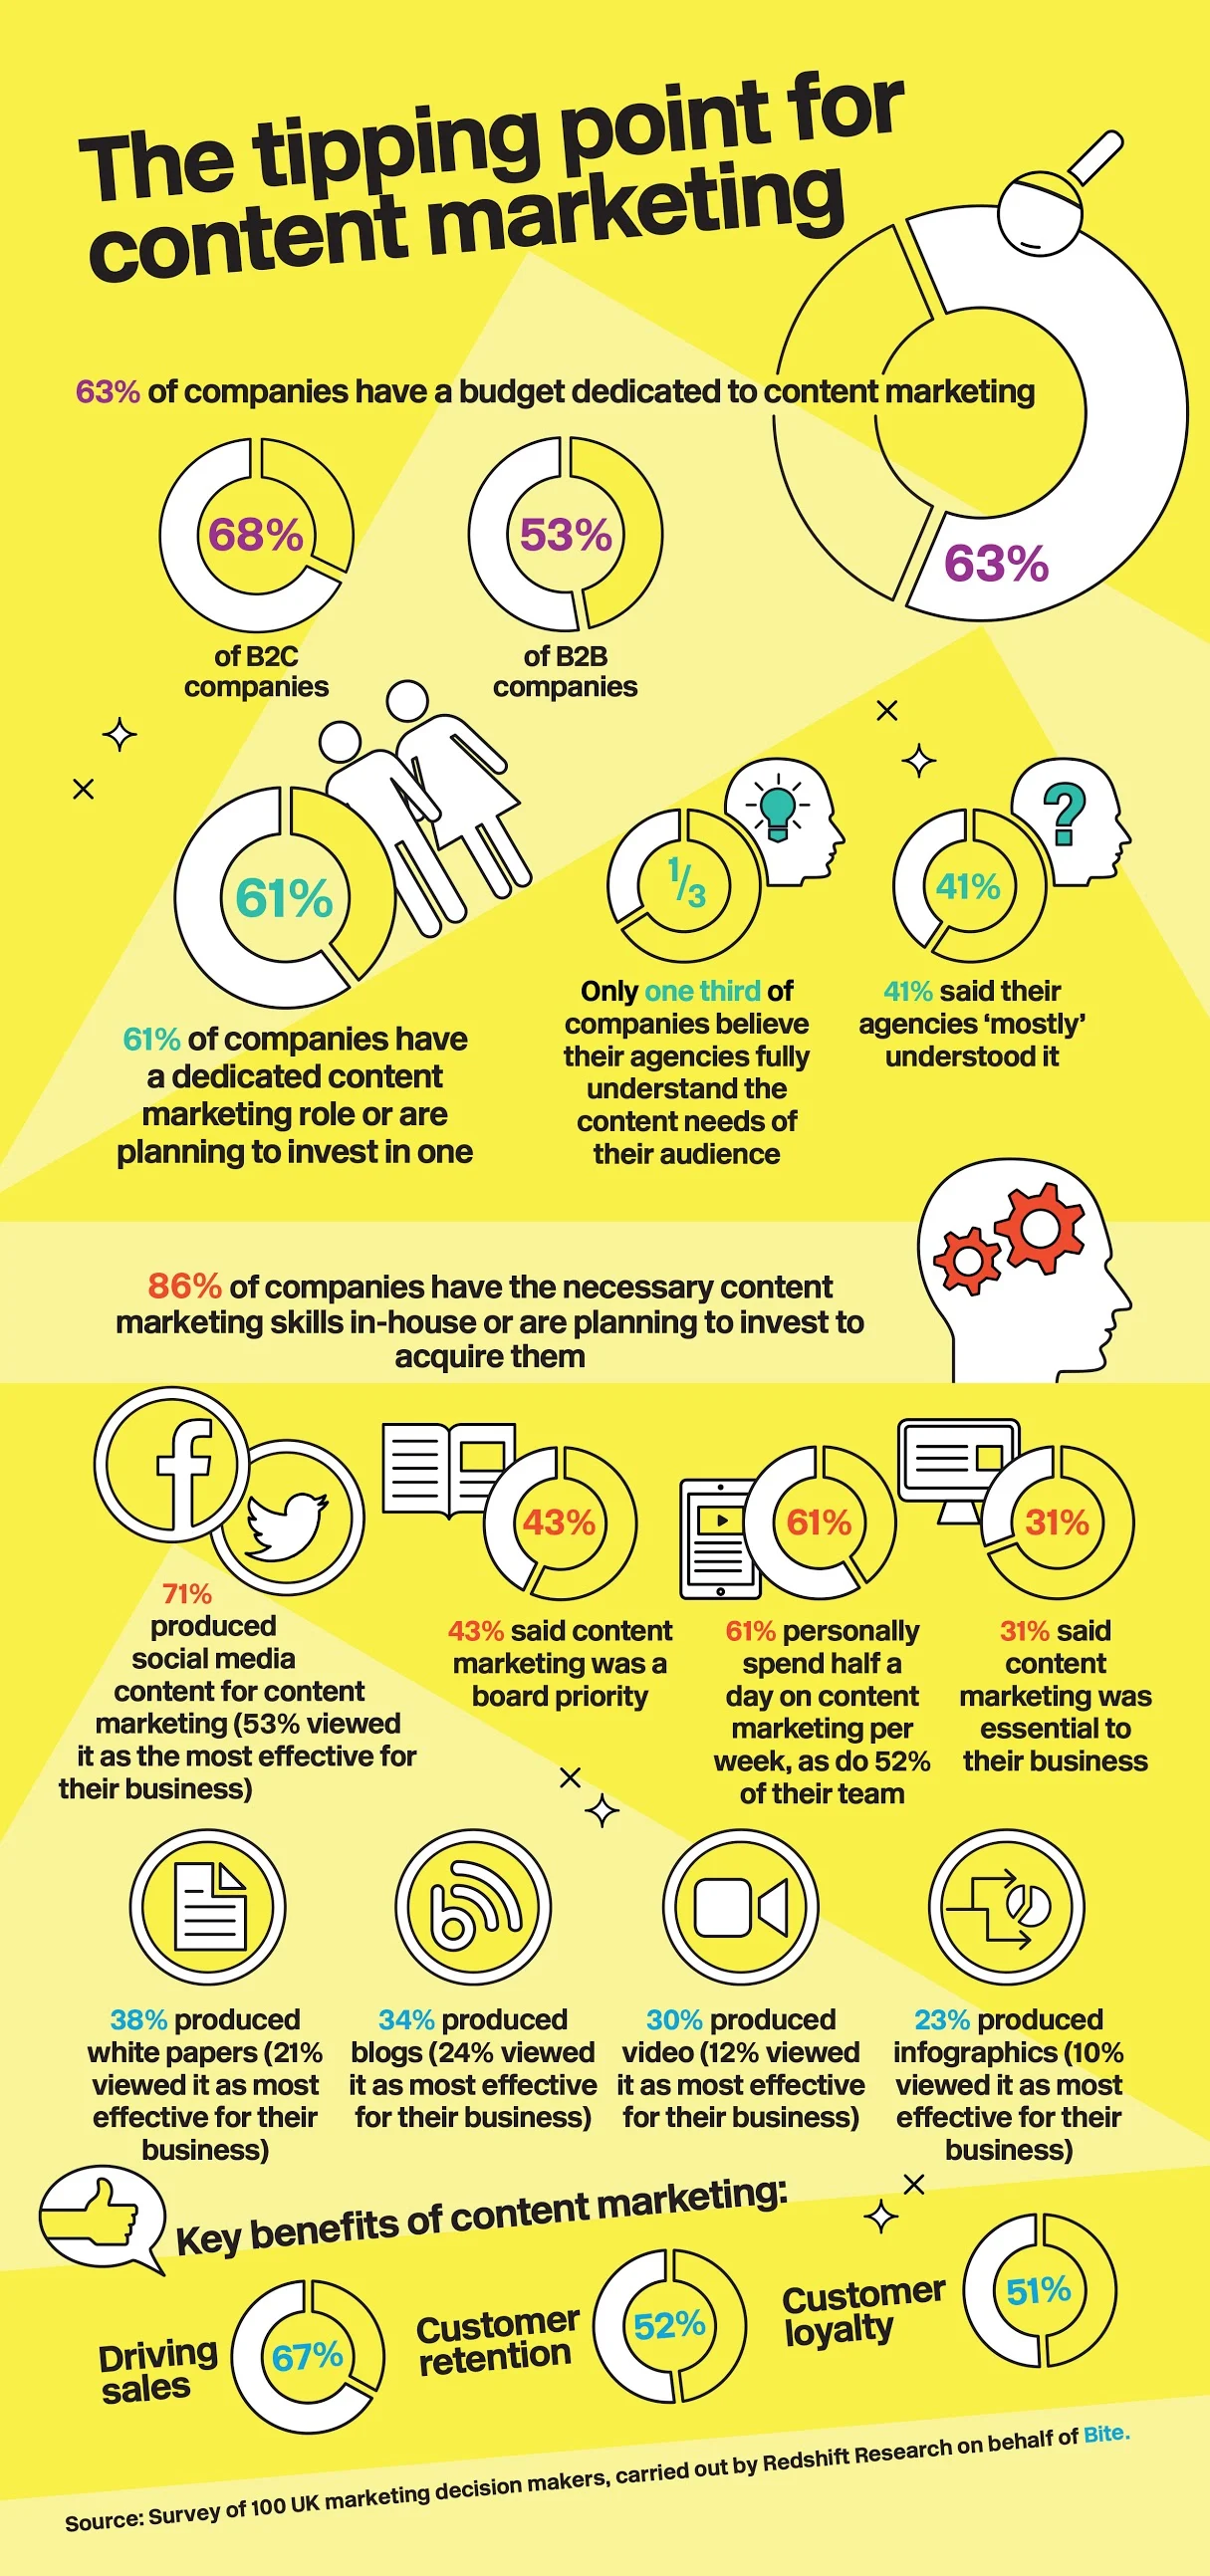 Infographic: only 28% of brands are able to measure the ROI of content marketing - what's your content marketing strategy